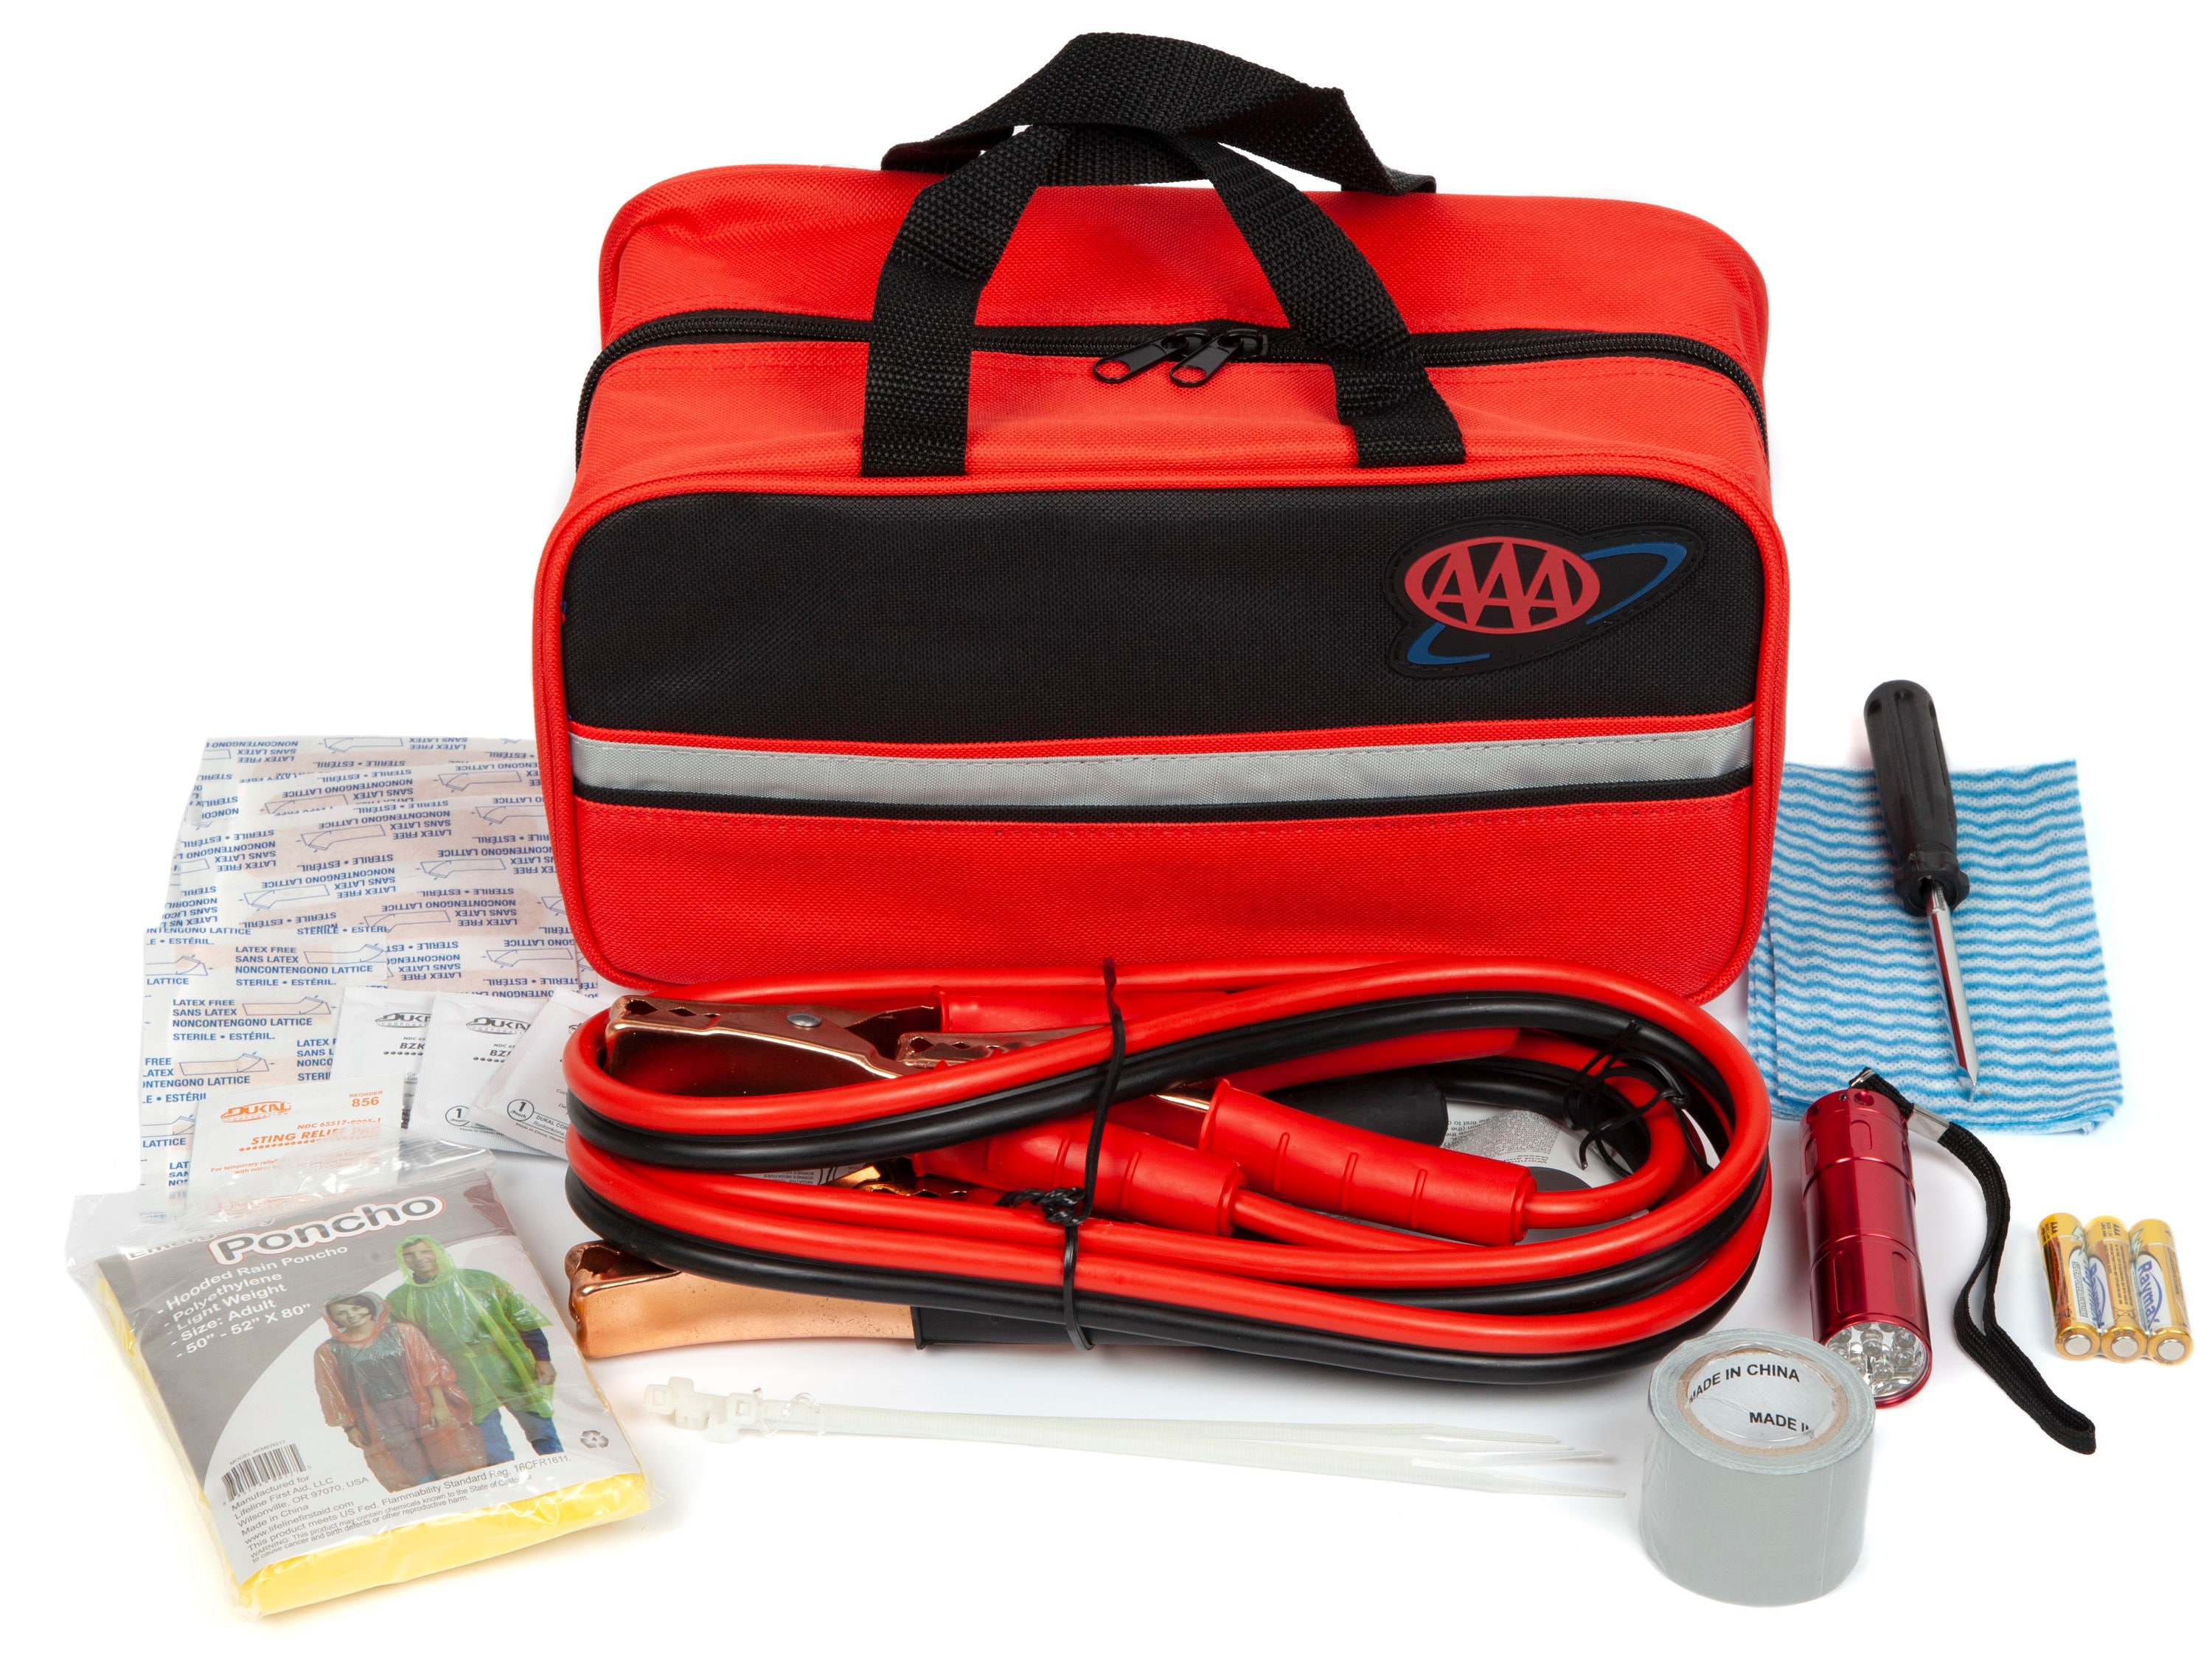 Lifeline First Aid AAA Road Kit - 42 Piece: Jumper Cables & First